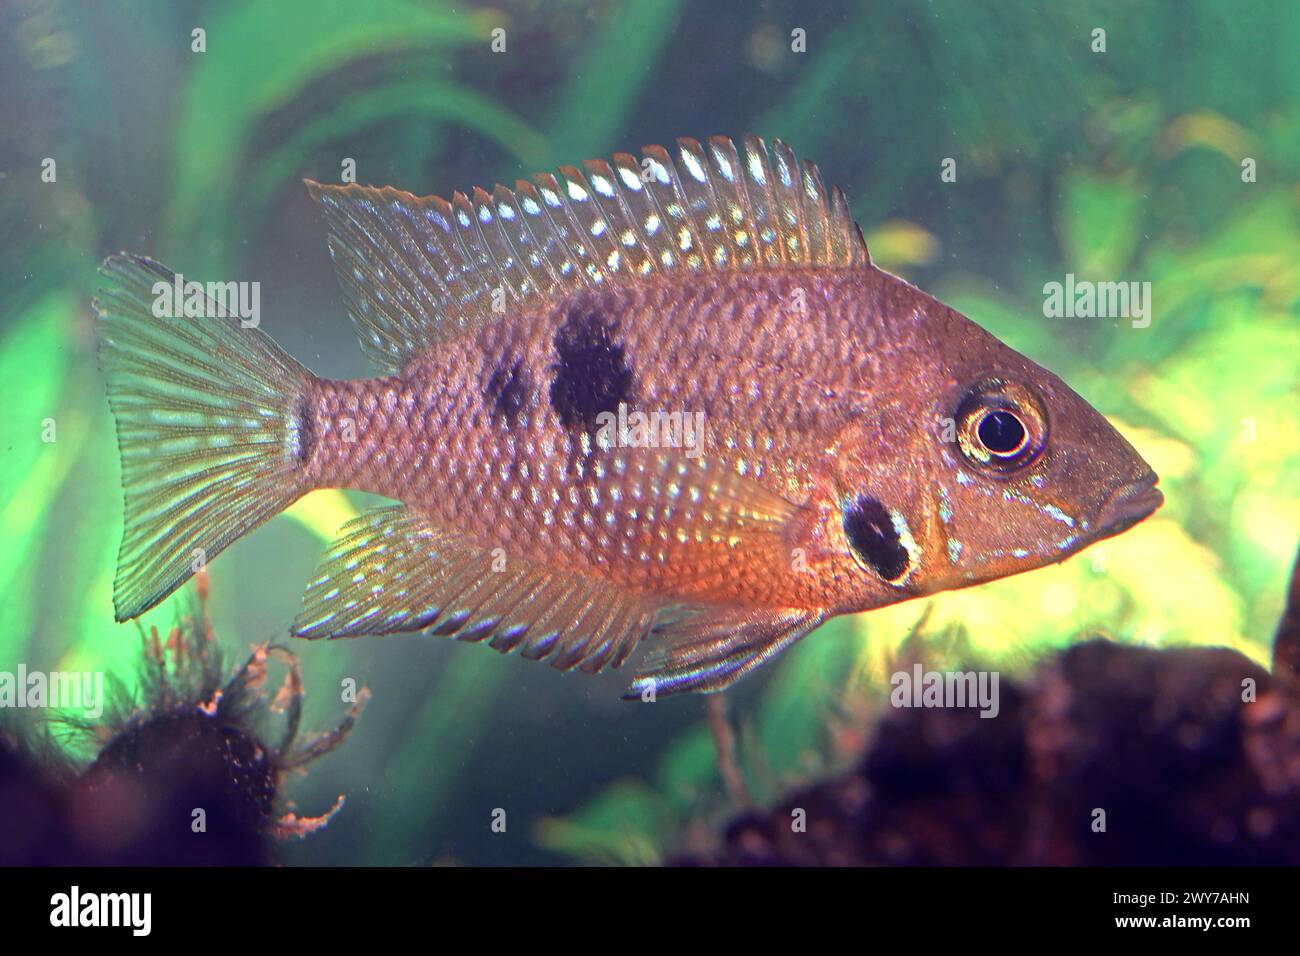 Aquarienfische als Haustiere Ein junger Feuermaul- oder auch Rotbrustbuntbarsch mit dem Namen Thorichthys meeki *** Aquarium fish as pets A young firemouth or red-breasted cichlid with the name Thorichthys meeki Stock Photo